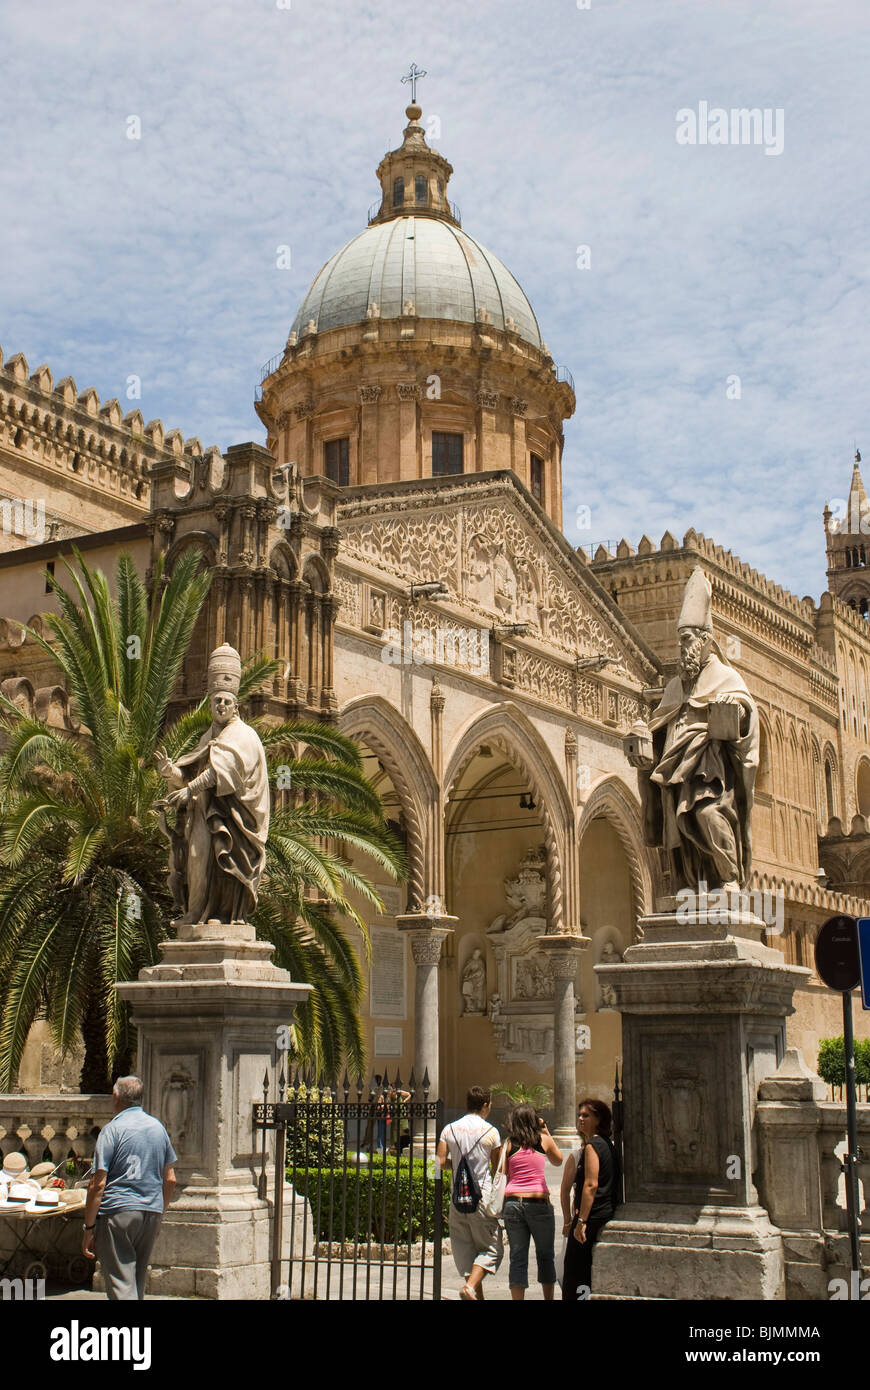 Italien, Sizilien, Palermo, Kathedrale | Italy, Sicily, Palermo, cathedral Stock Photo